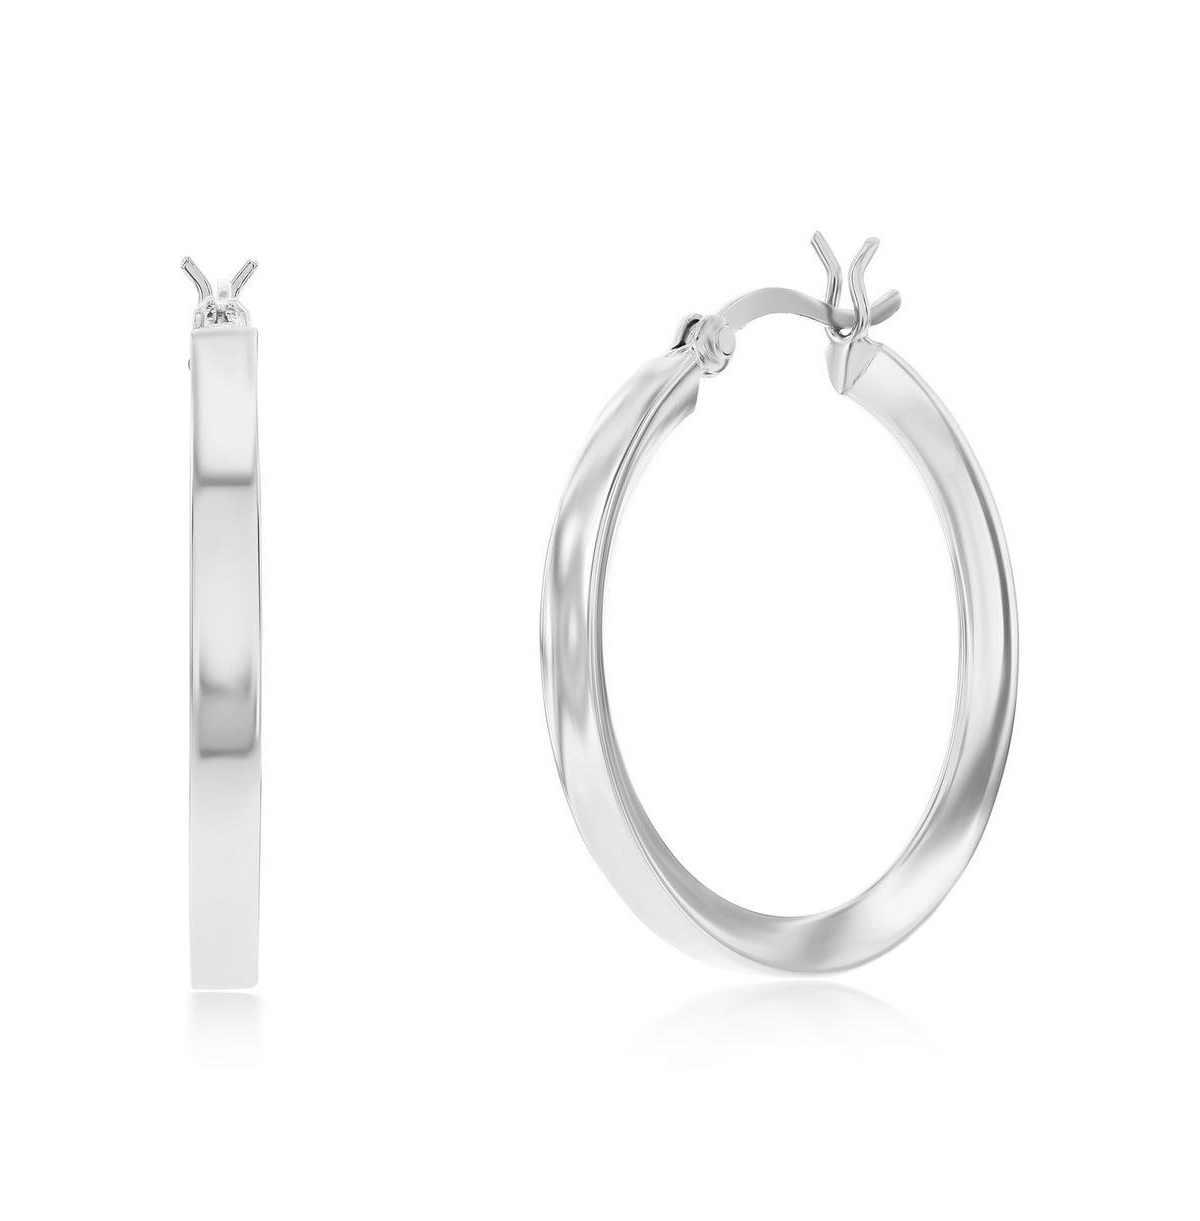 Sterling Silver or Gold Plated over Sterling Silver 3x30mm Fancy Flat Hoop Earrings - Silver